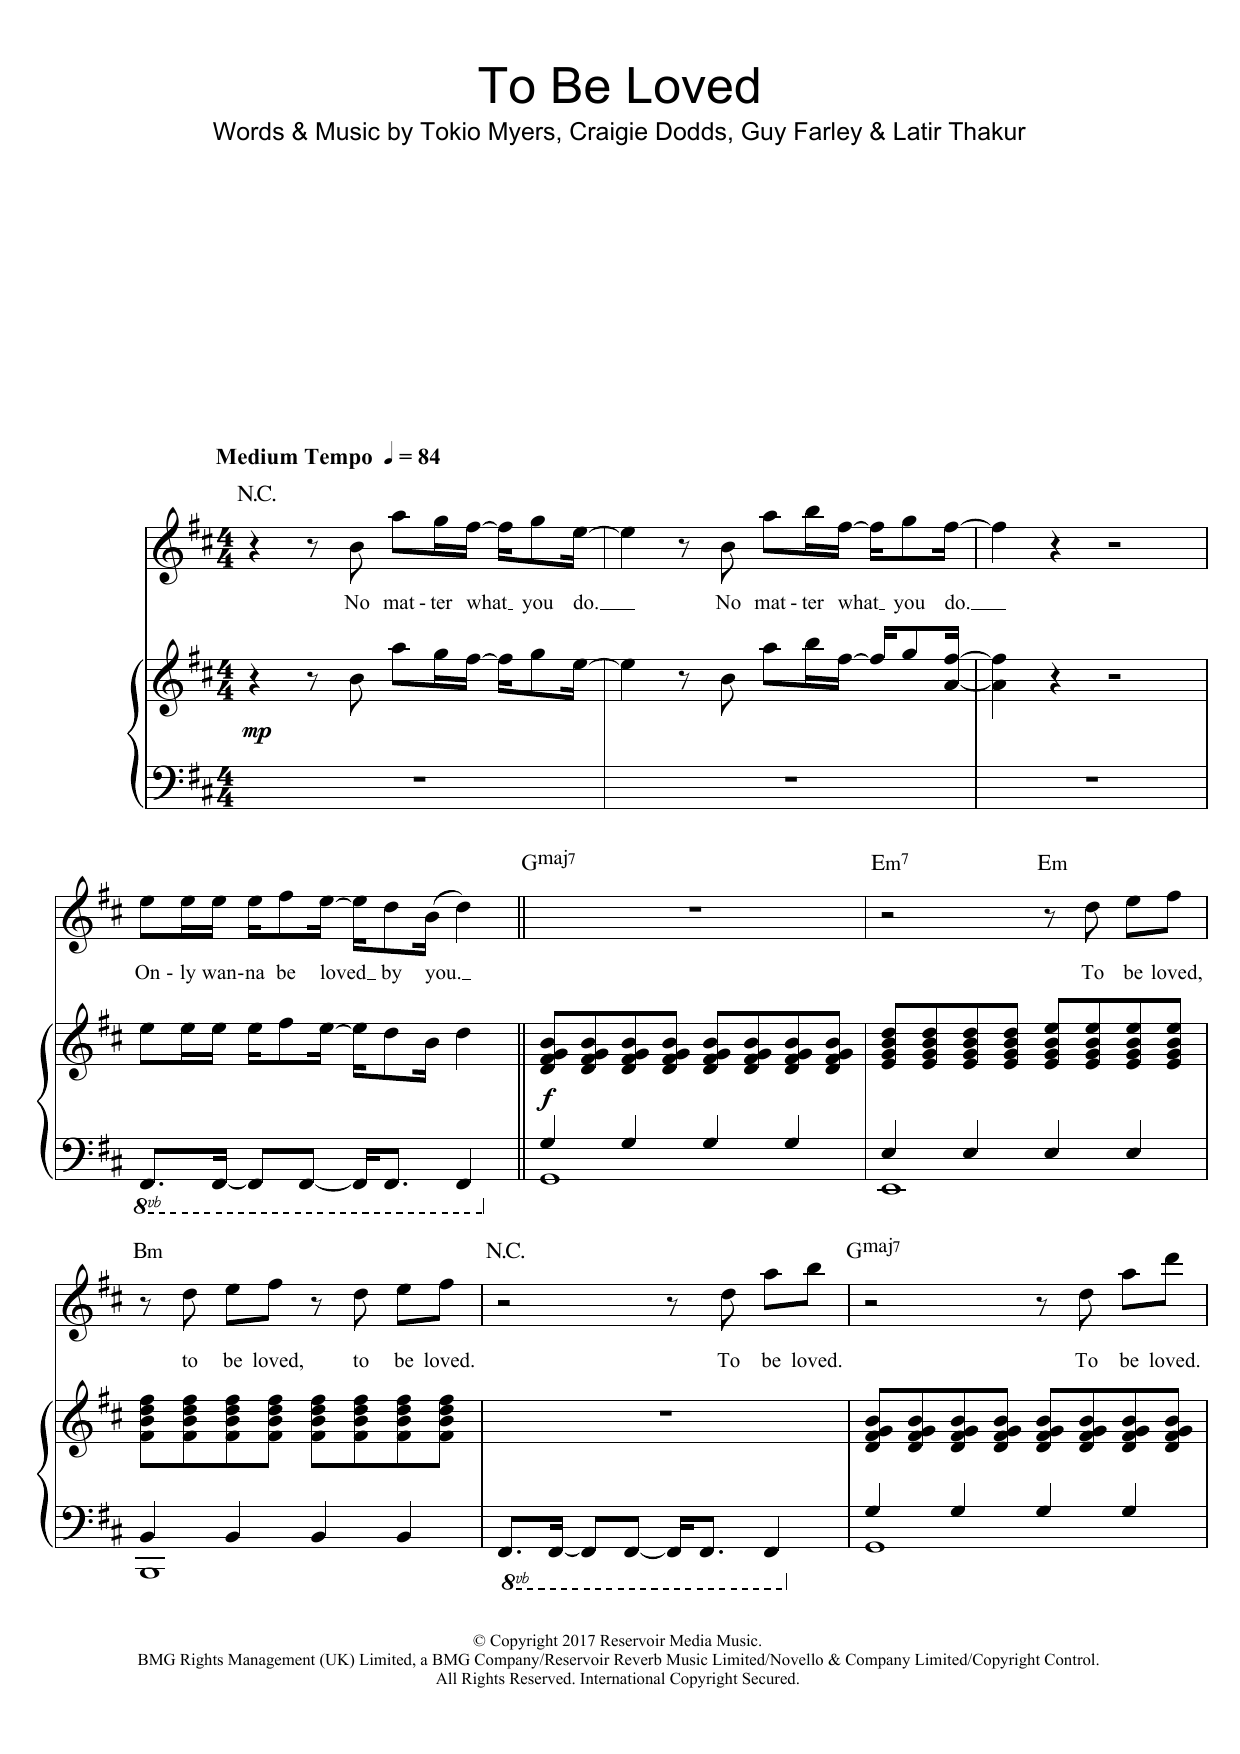 Download Tokio Myers To Be Loved Sheet Music